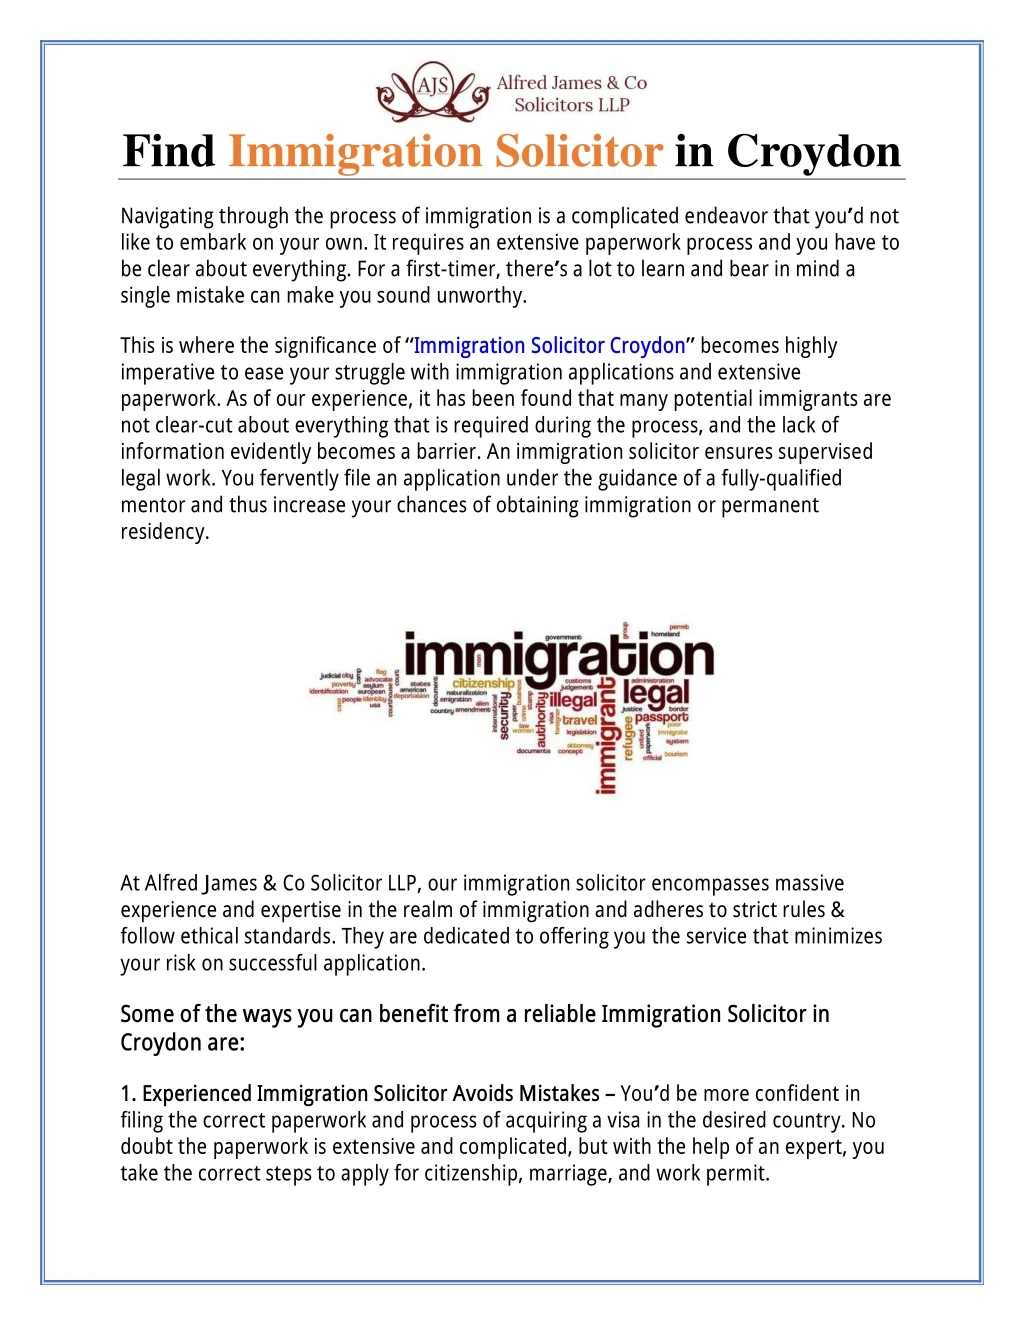 find immigration solicitor in croydon